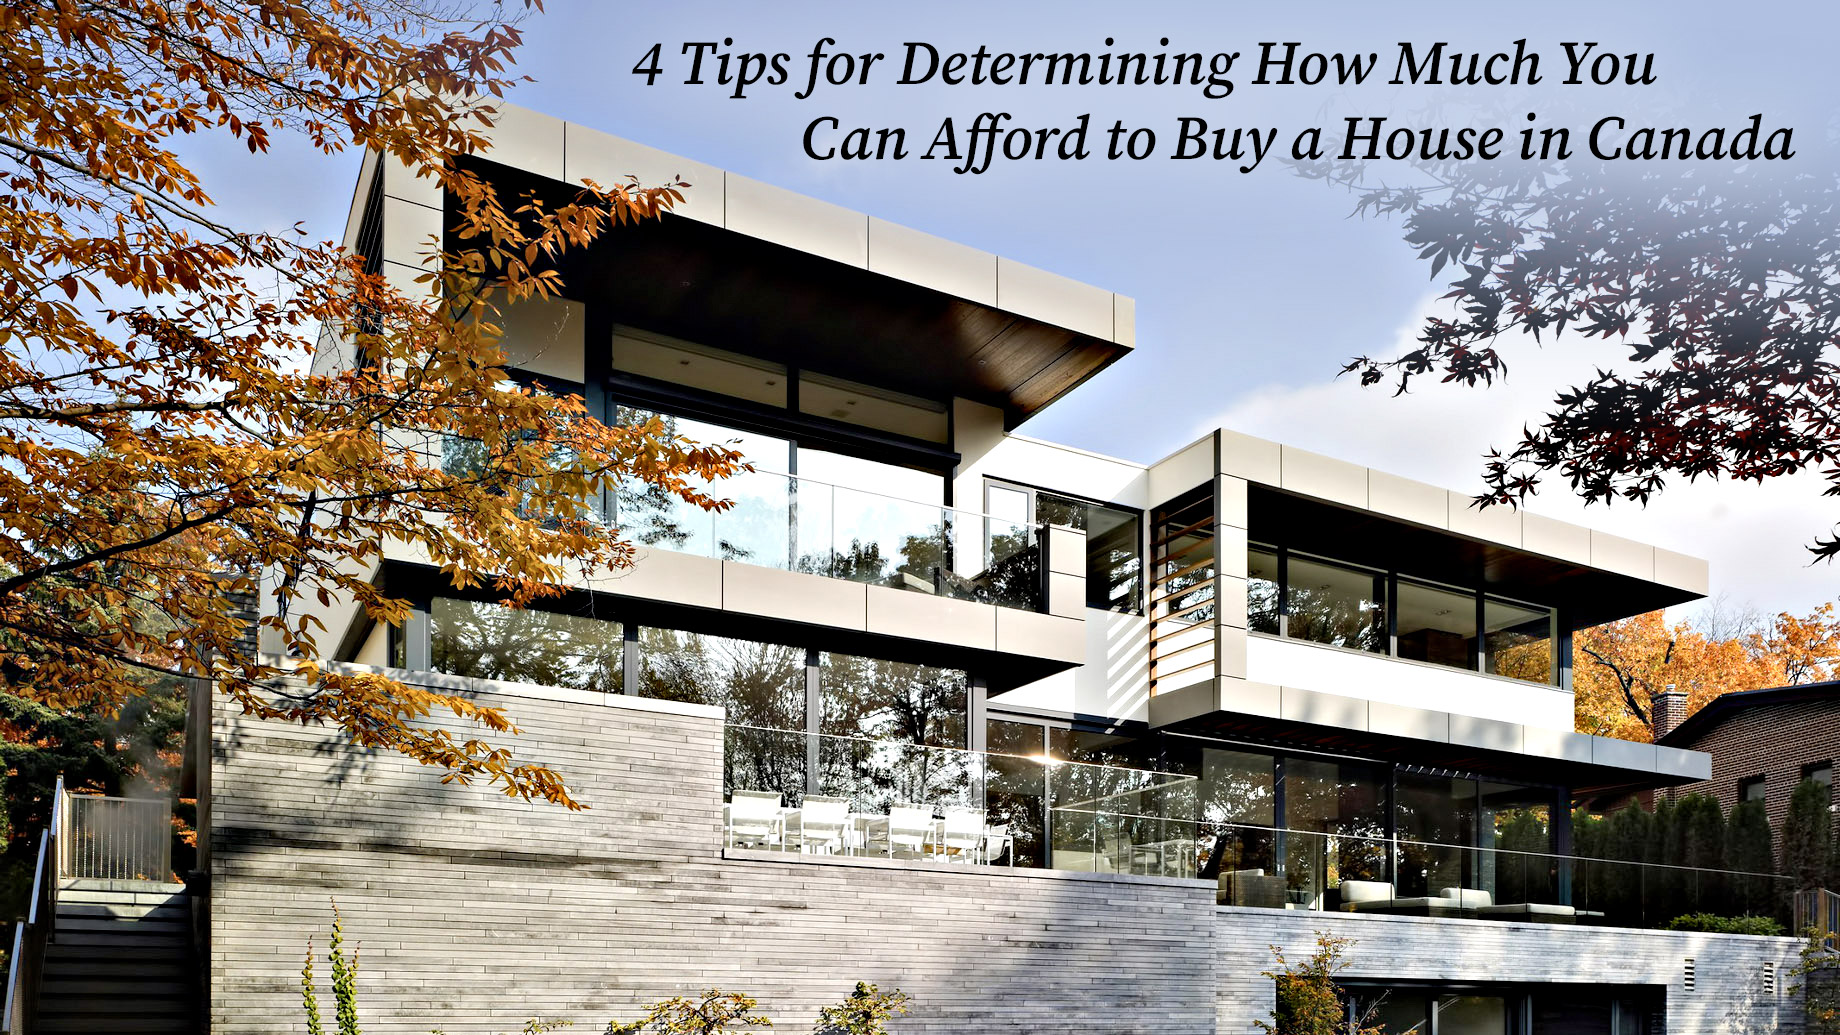 4 Tips for Determining How Much You Can Afford to Buy a House in Canada